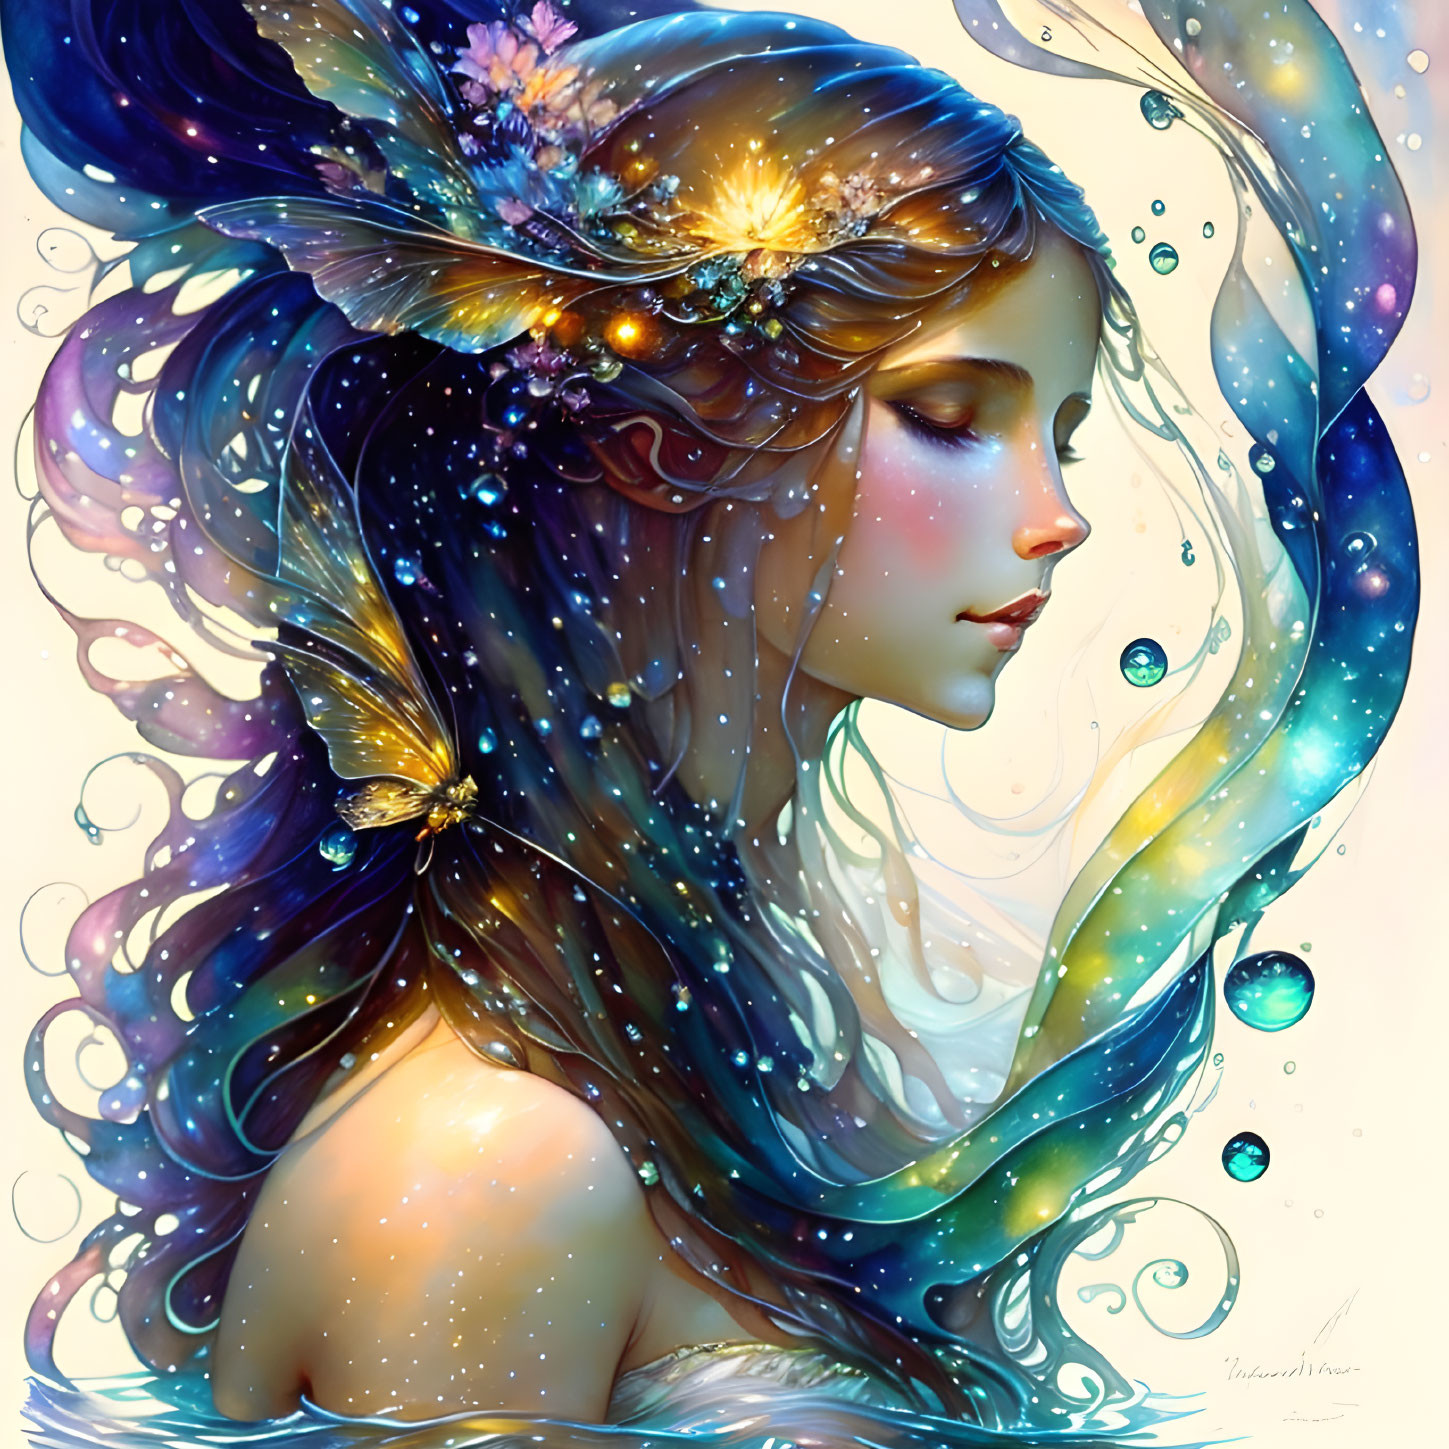 Fantasy illustration of woman with flowing hair and celestial adornments surrounded by bubbles on colorful backdrop